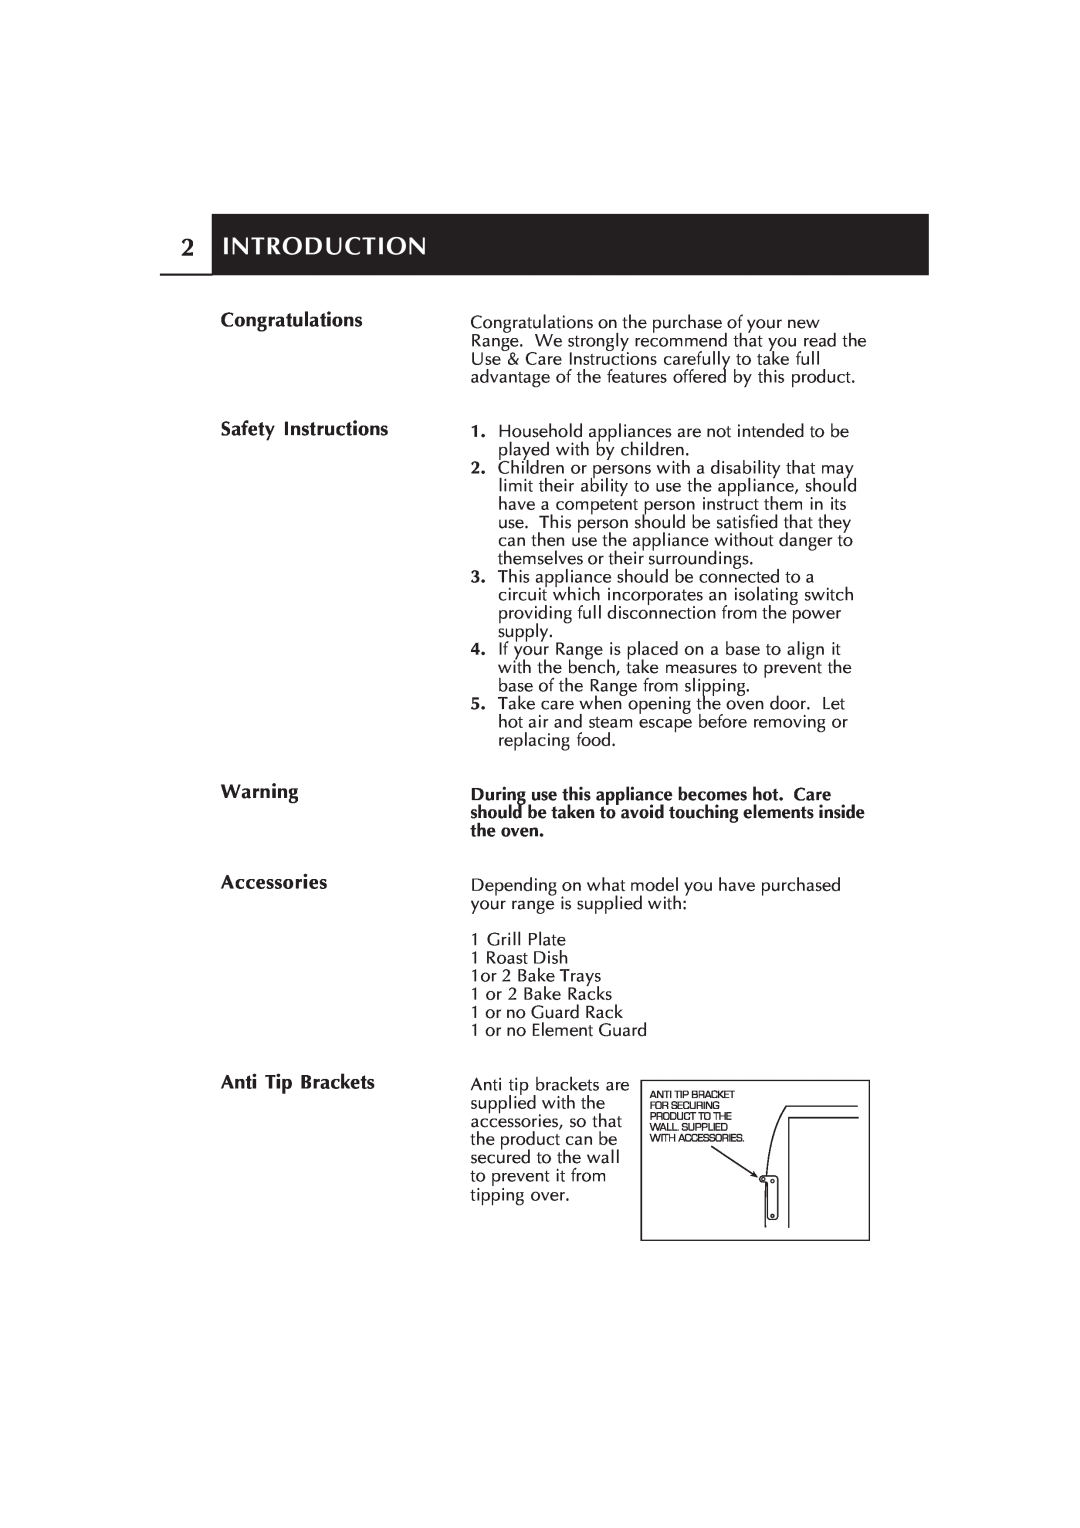 Fisher & Paykel RA535 Series manual Introduction, Congratulations Safety Instructions, Accessories Anti Tip Brackets 